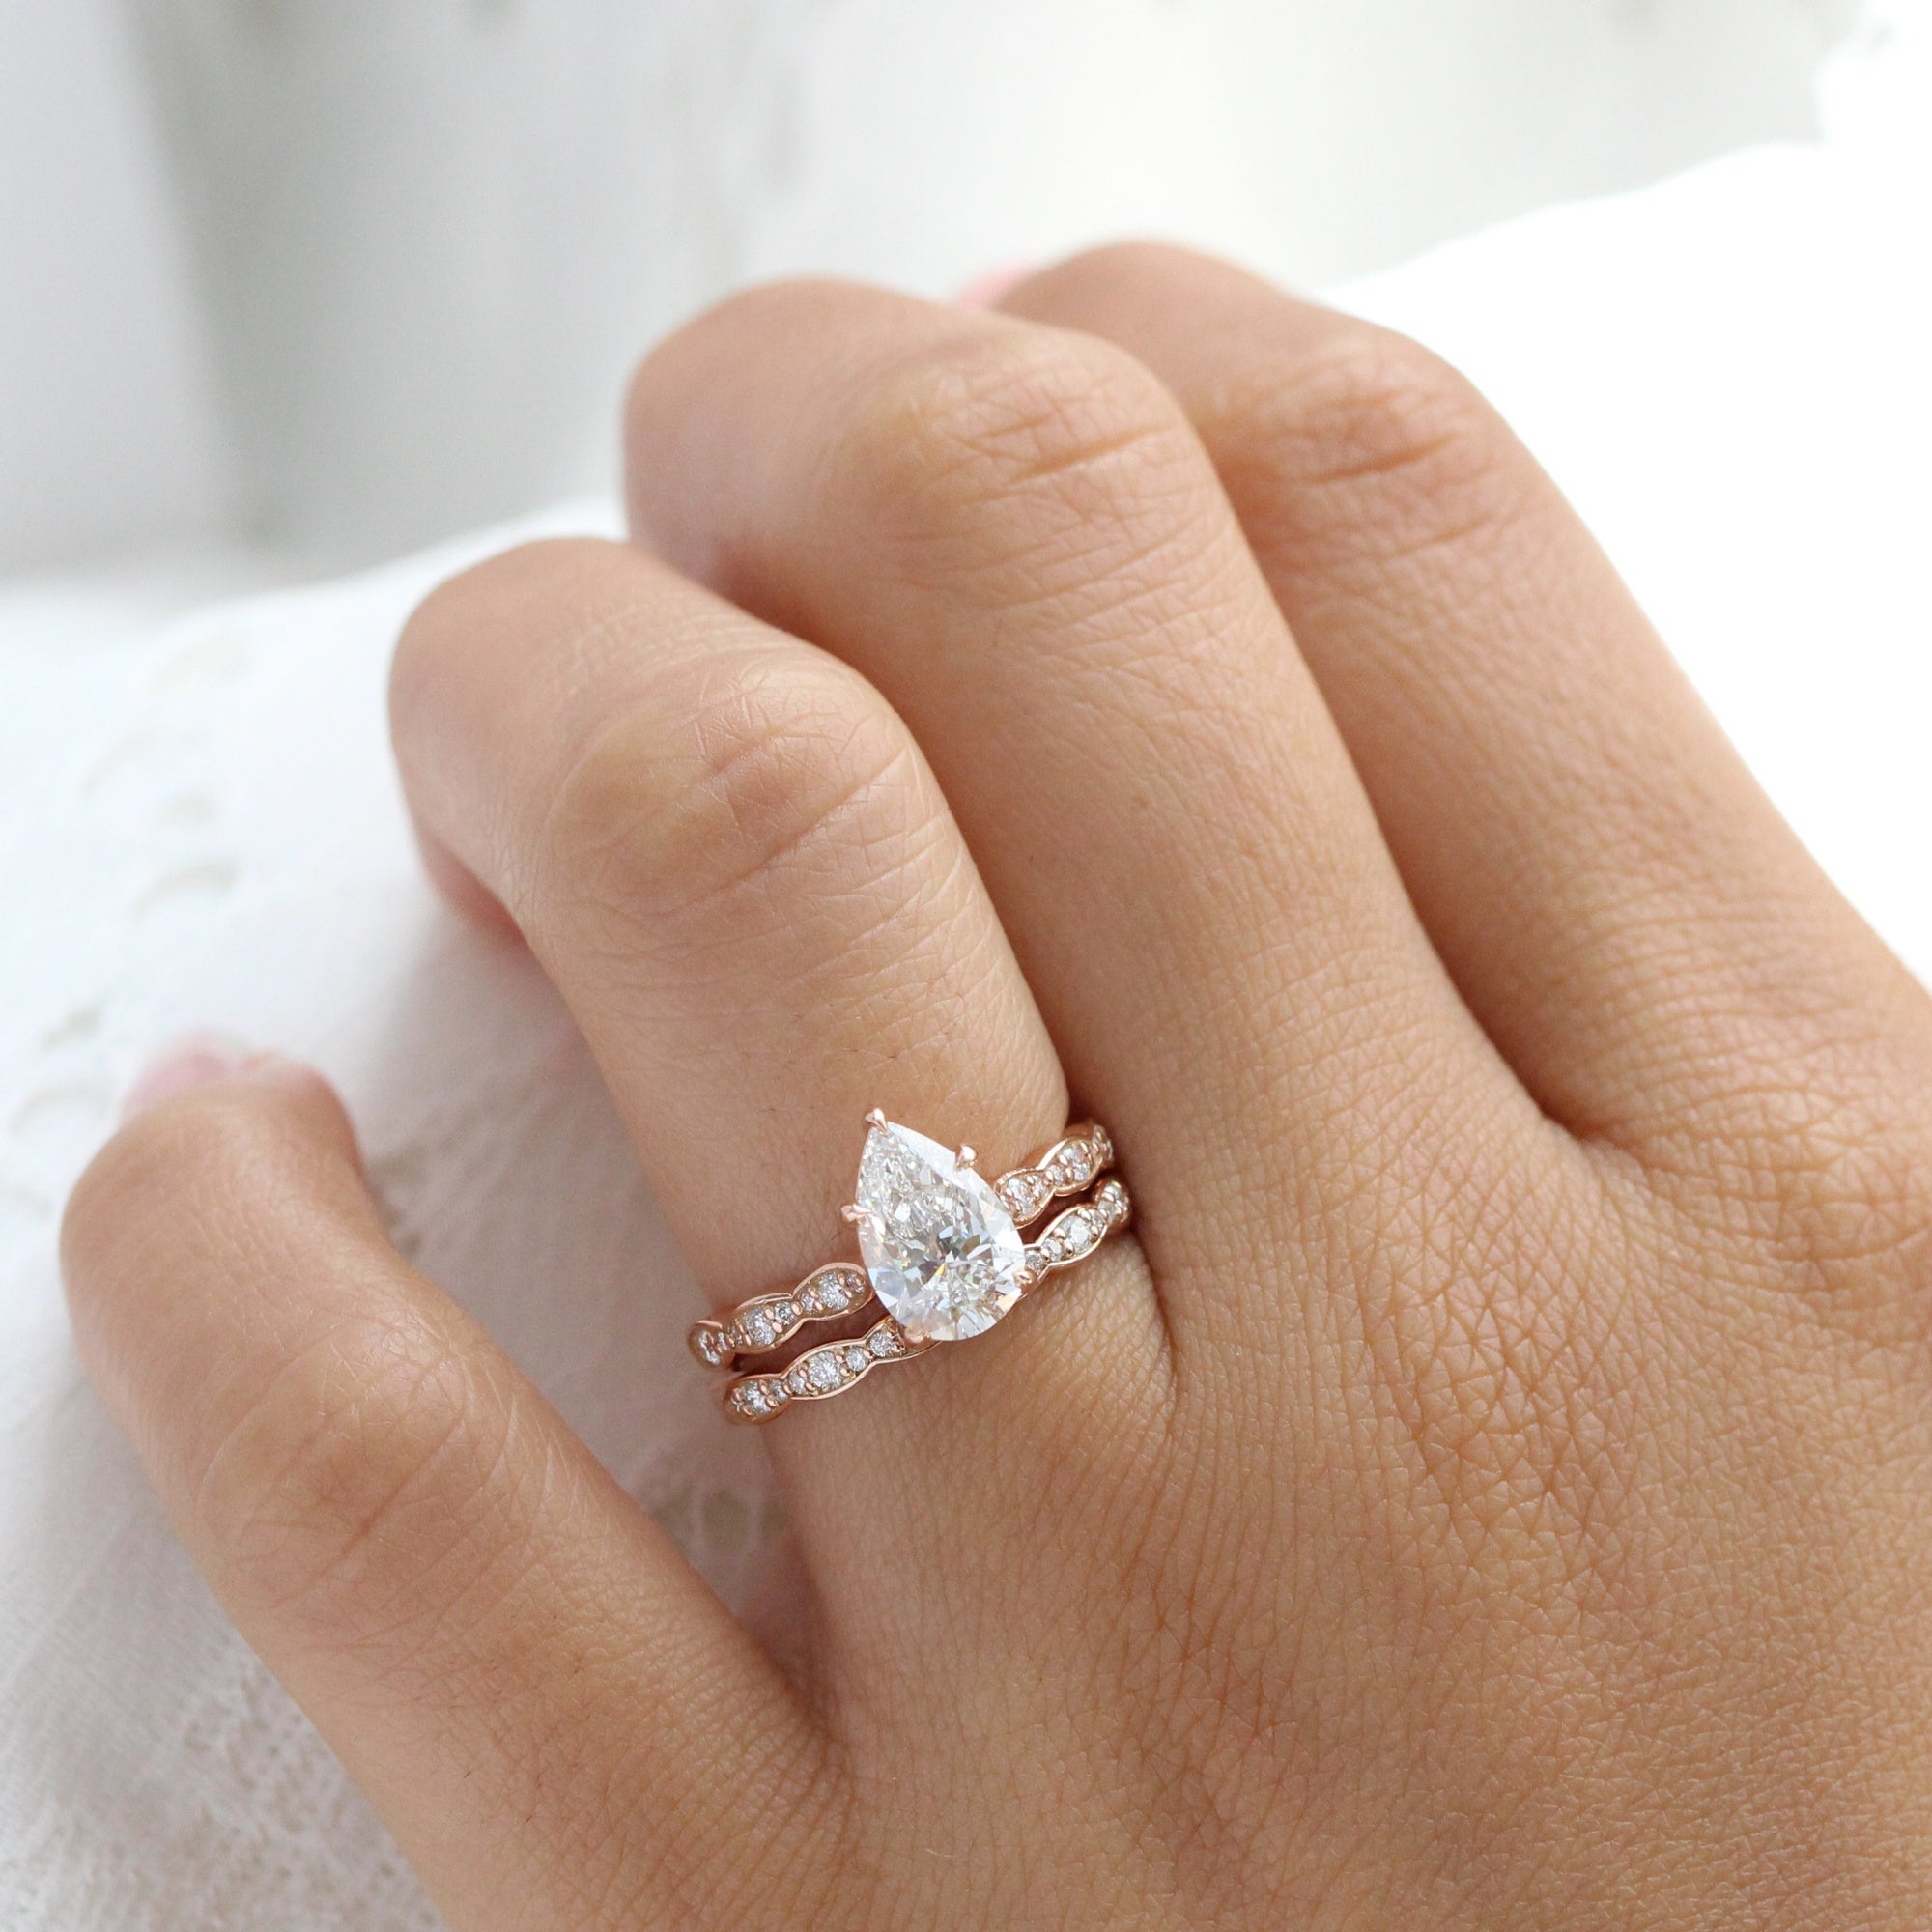 Large Pear Lab Diamond Ring Stack Rose Gold Solitaire Ring Bridal